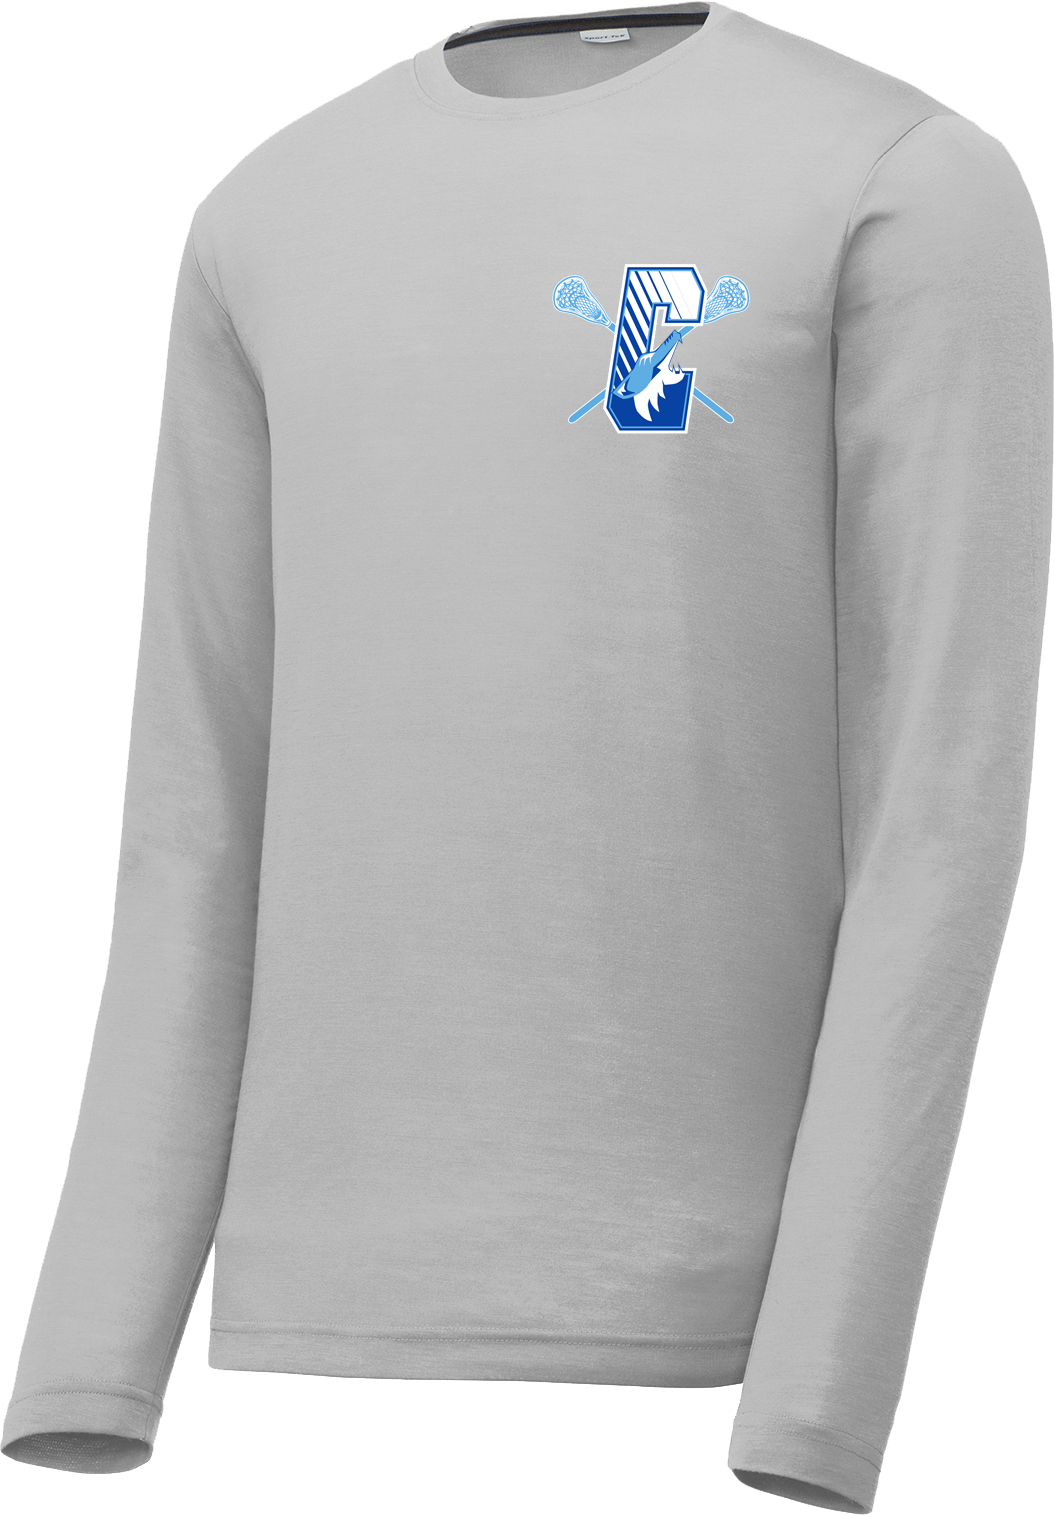 Coyotes Lacrosse Silver Long Sleeve CottonTouch Performance Shirt